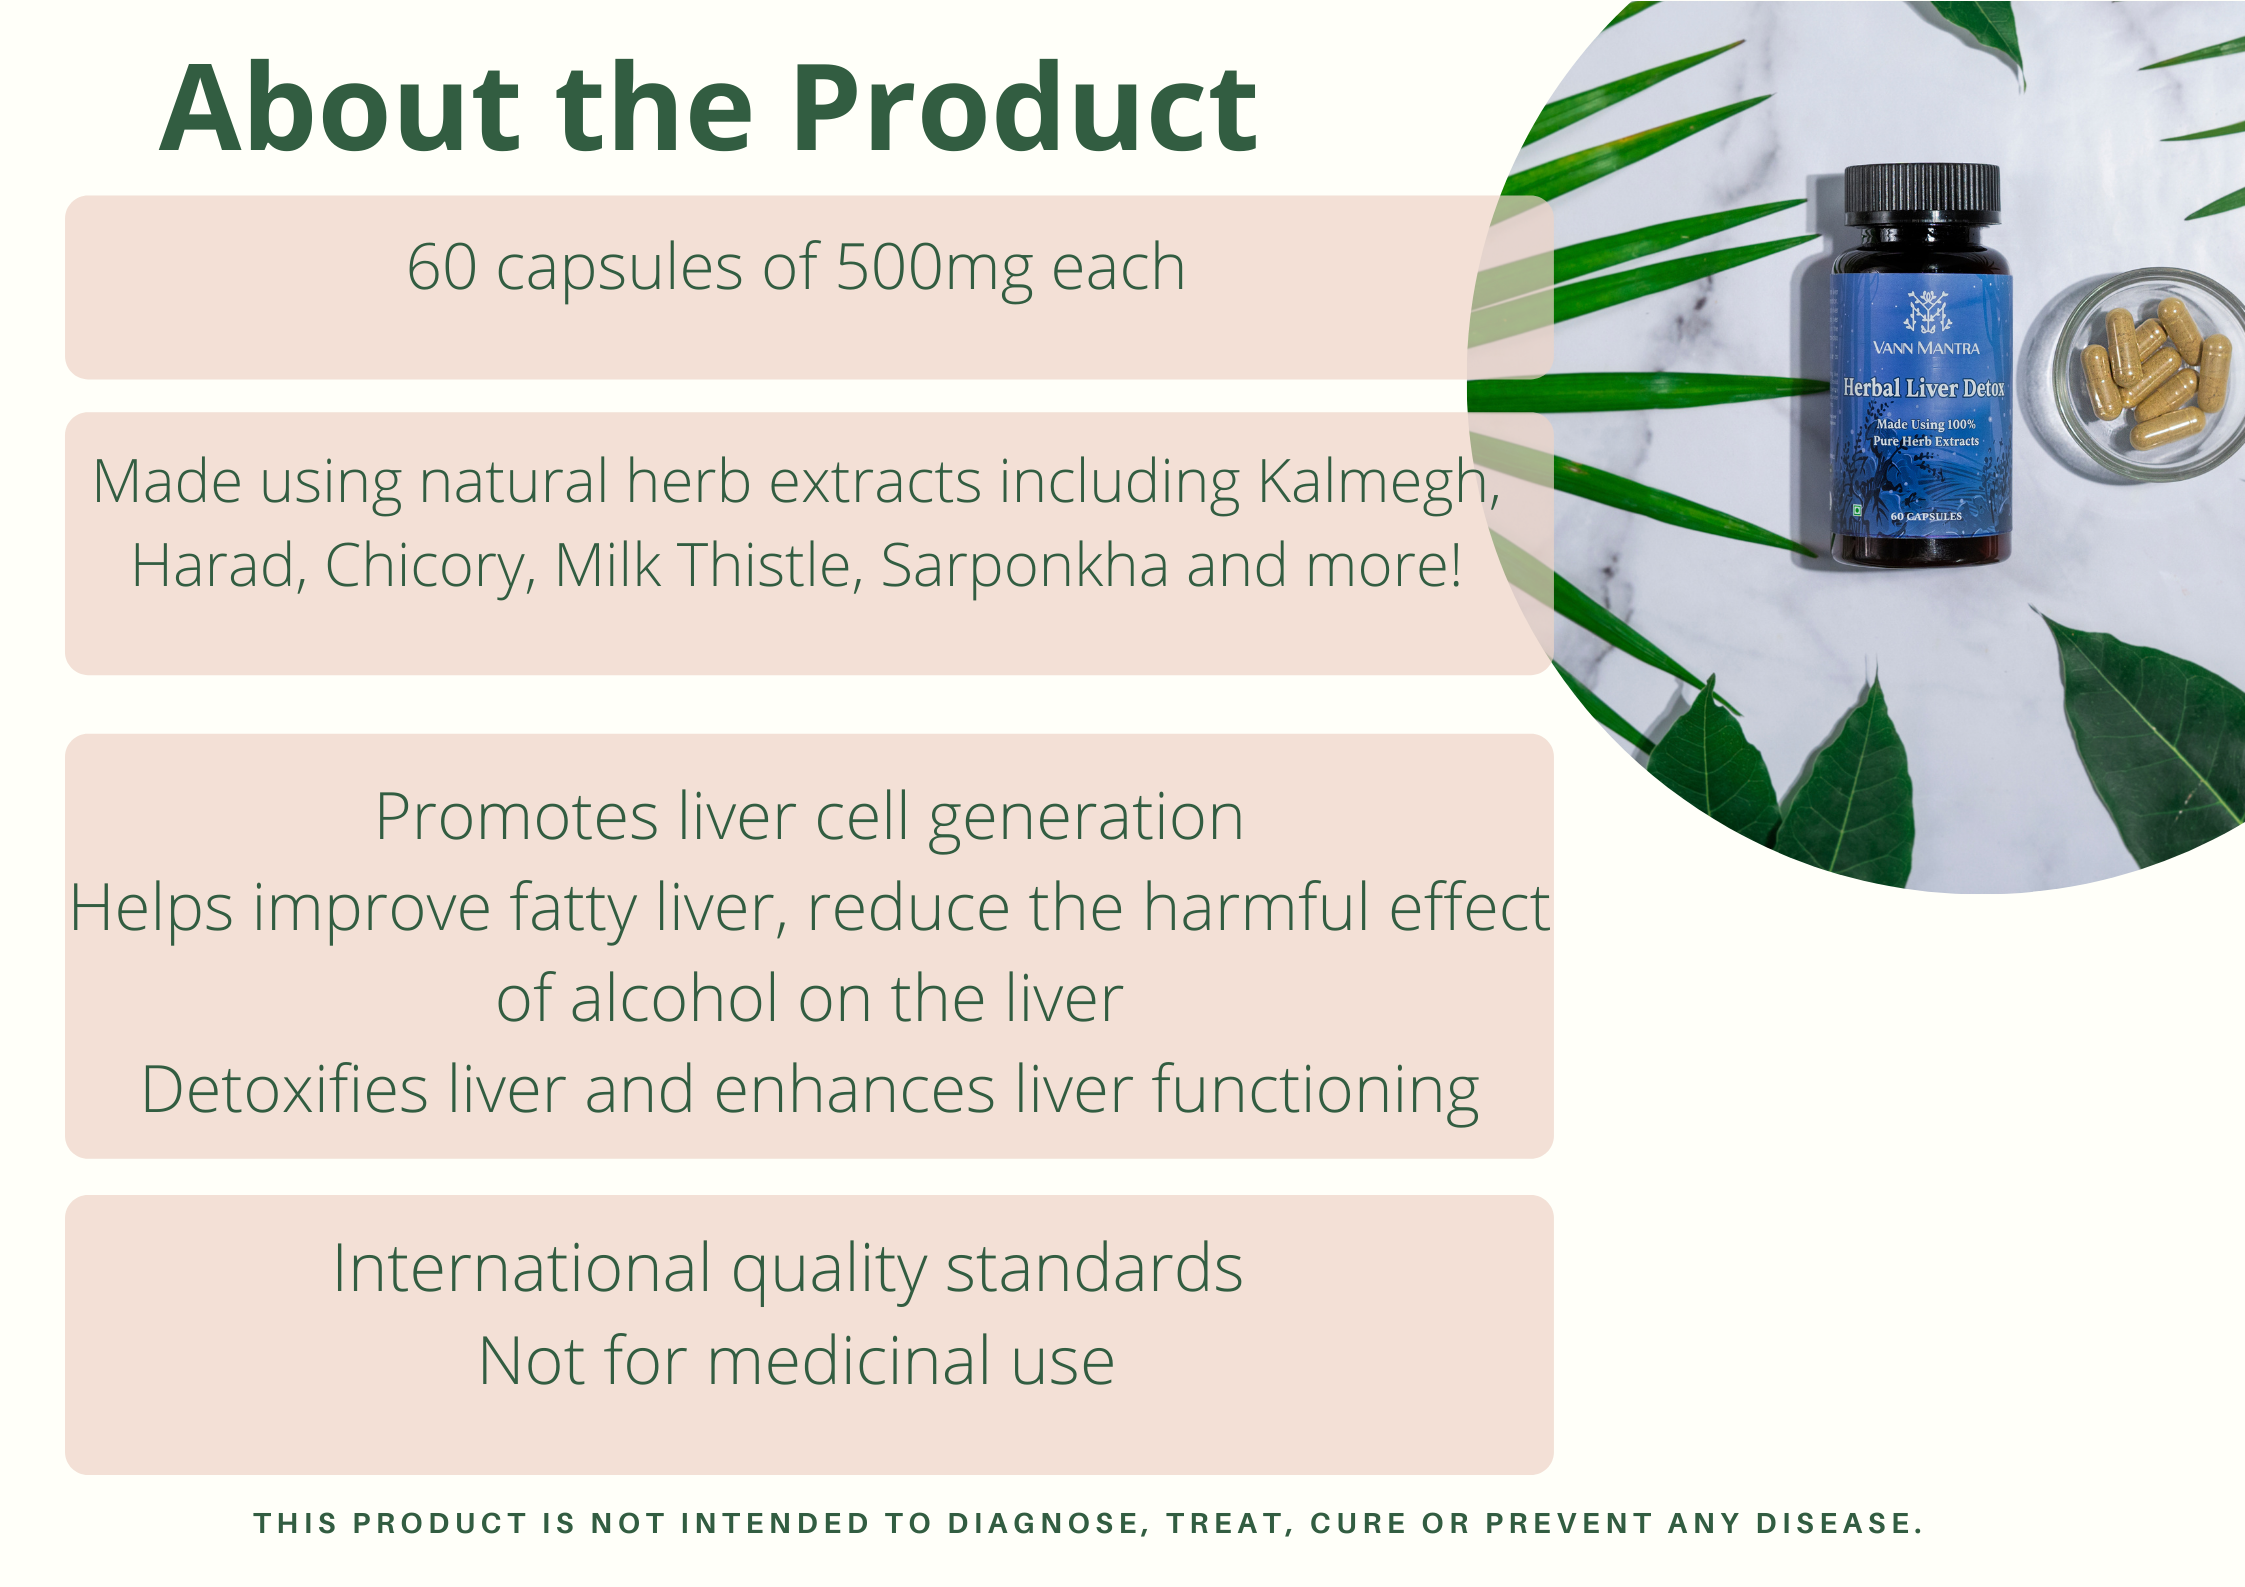 Infographic explaining the features and benefits of Herbal Liver Detox Capsules.